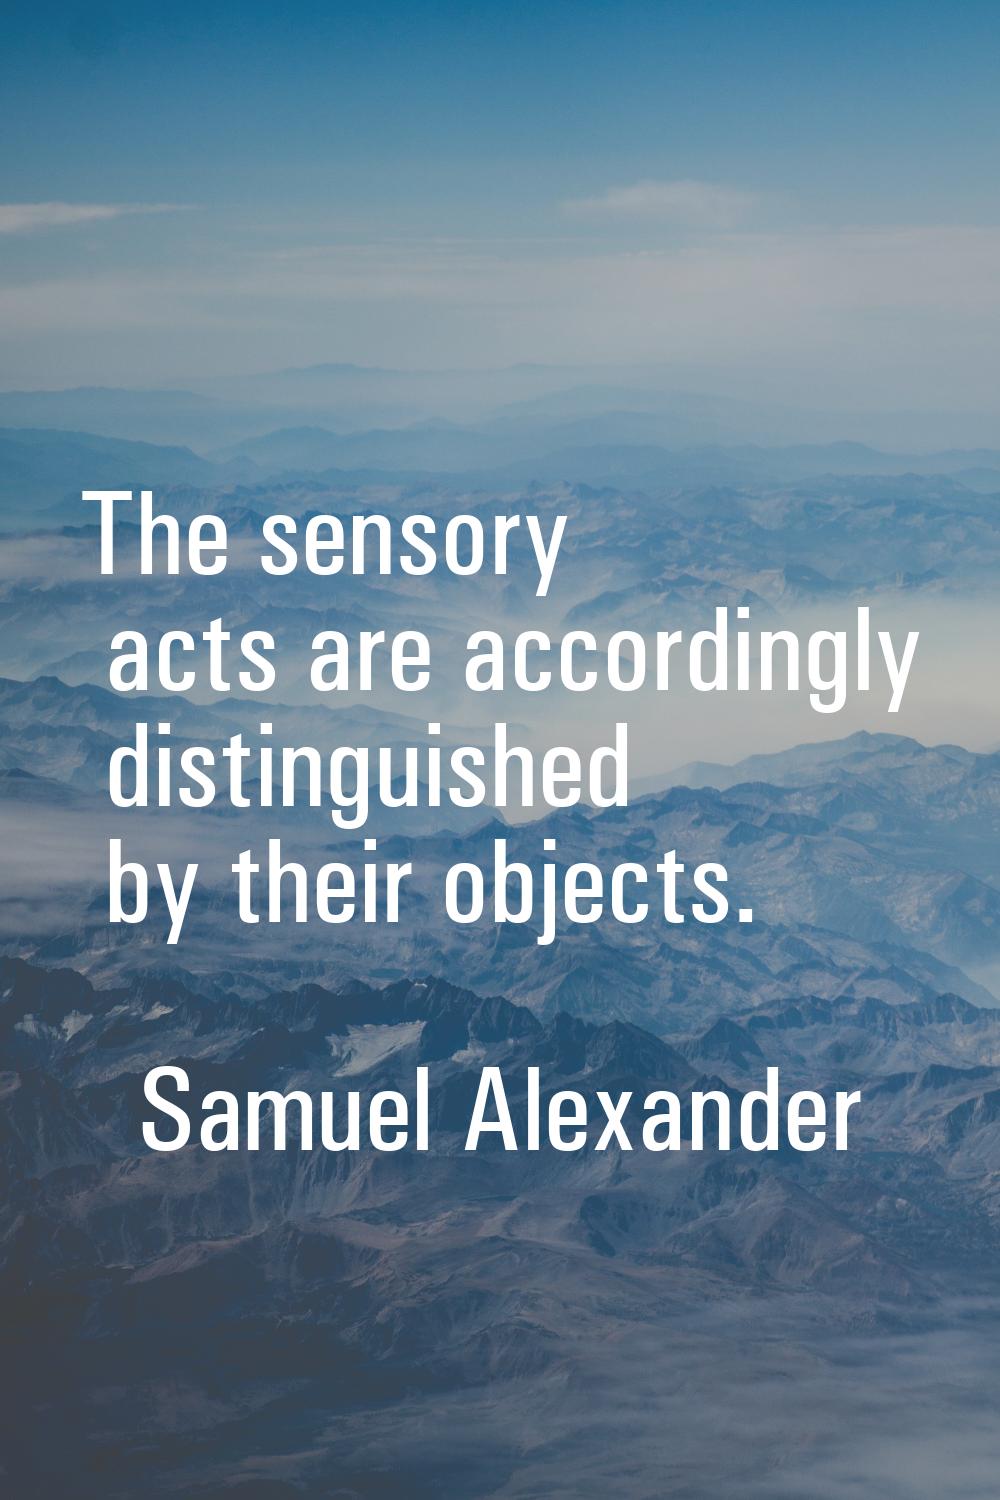 The sensory acts are accordingly distinguished by their objects.